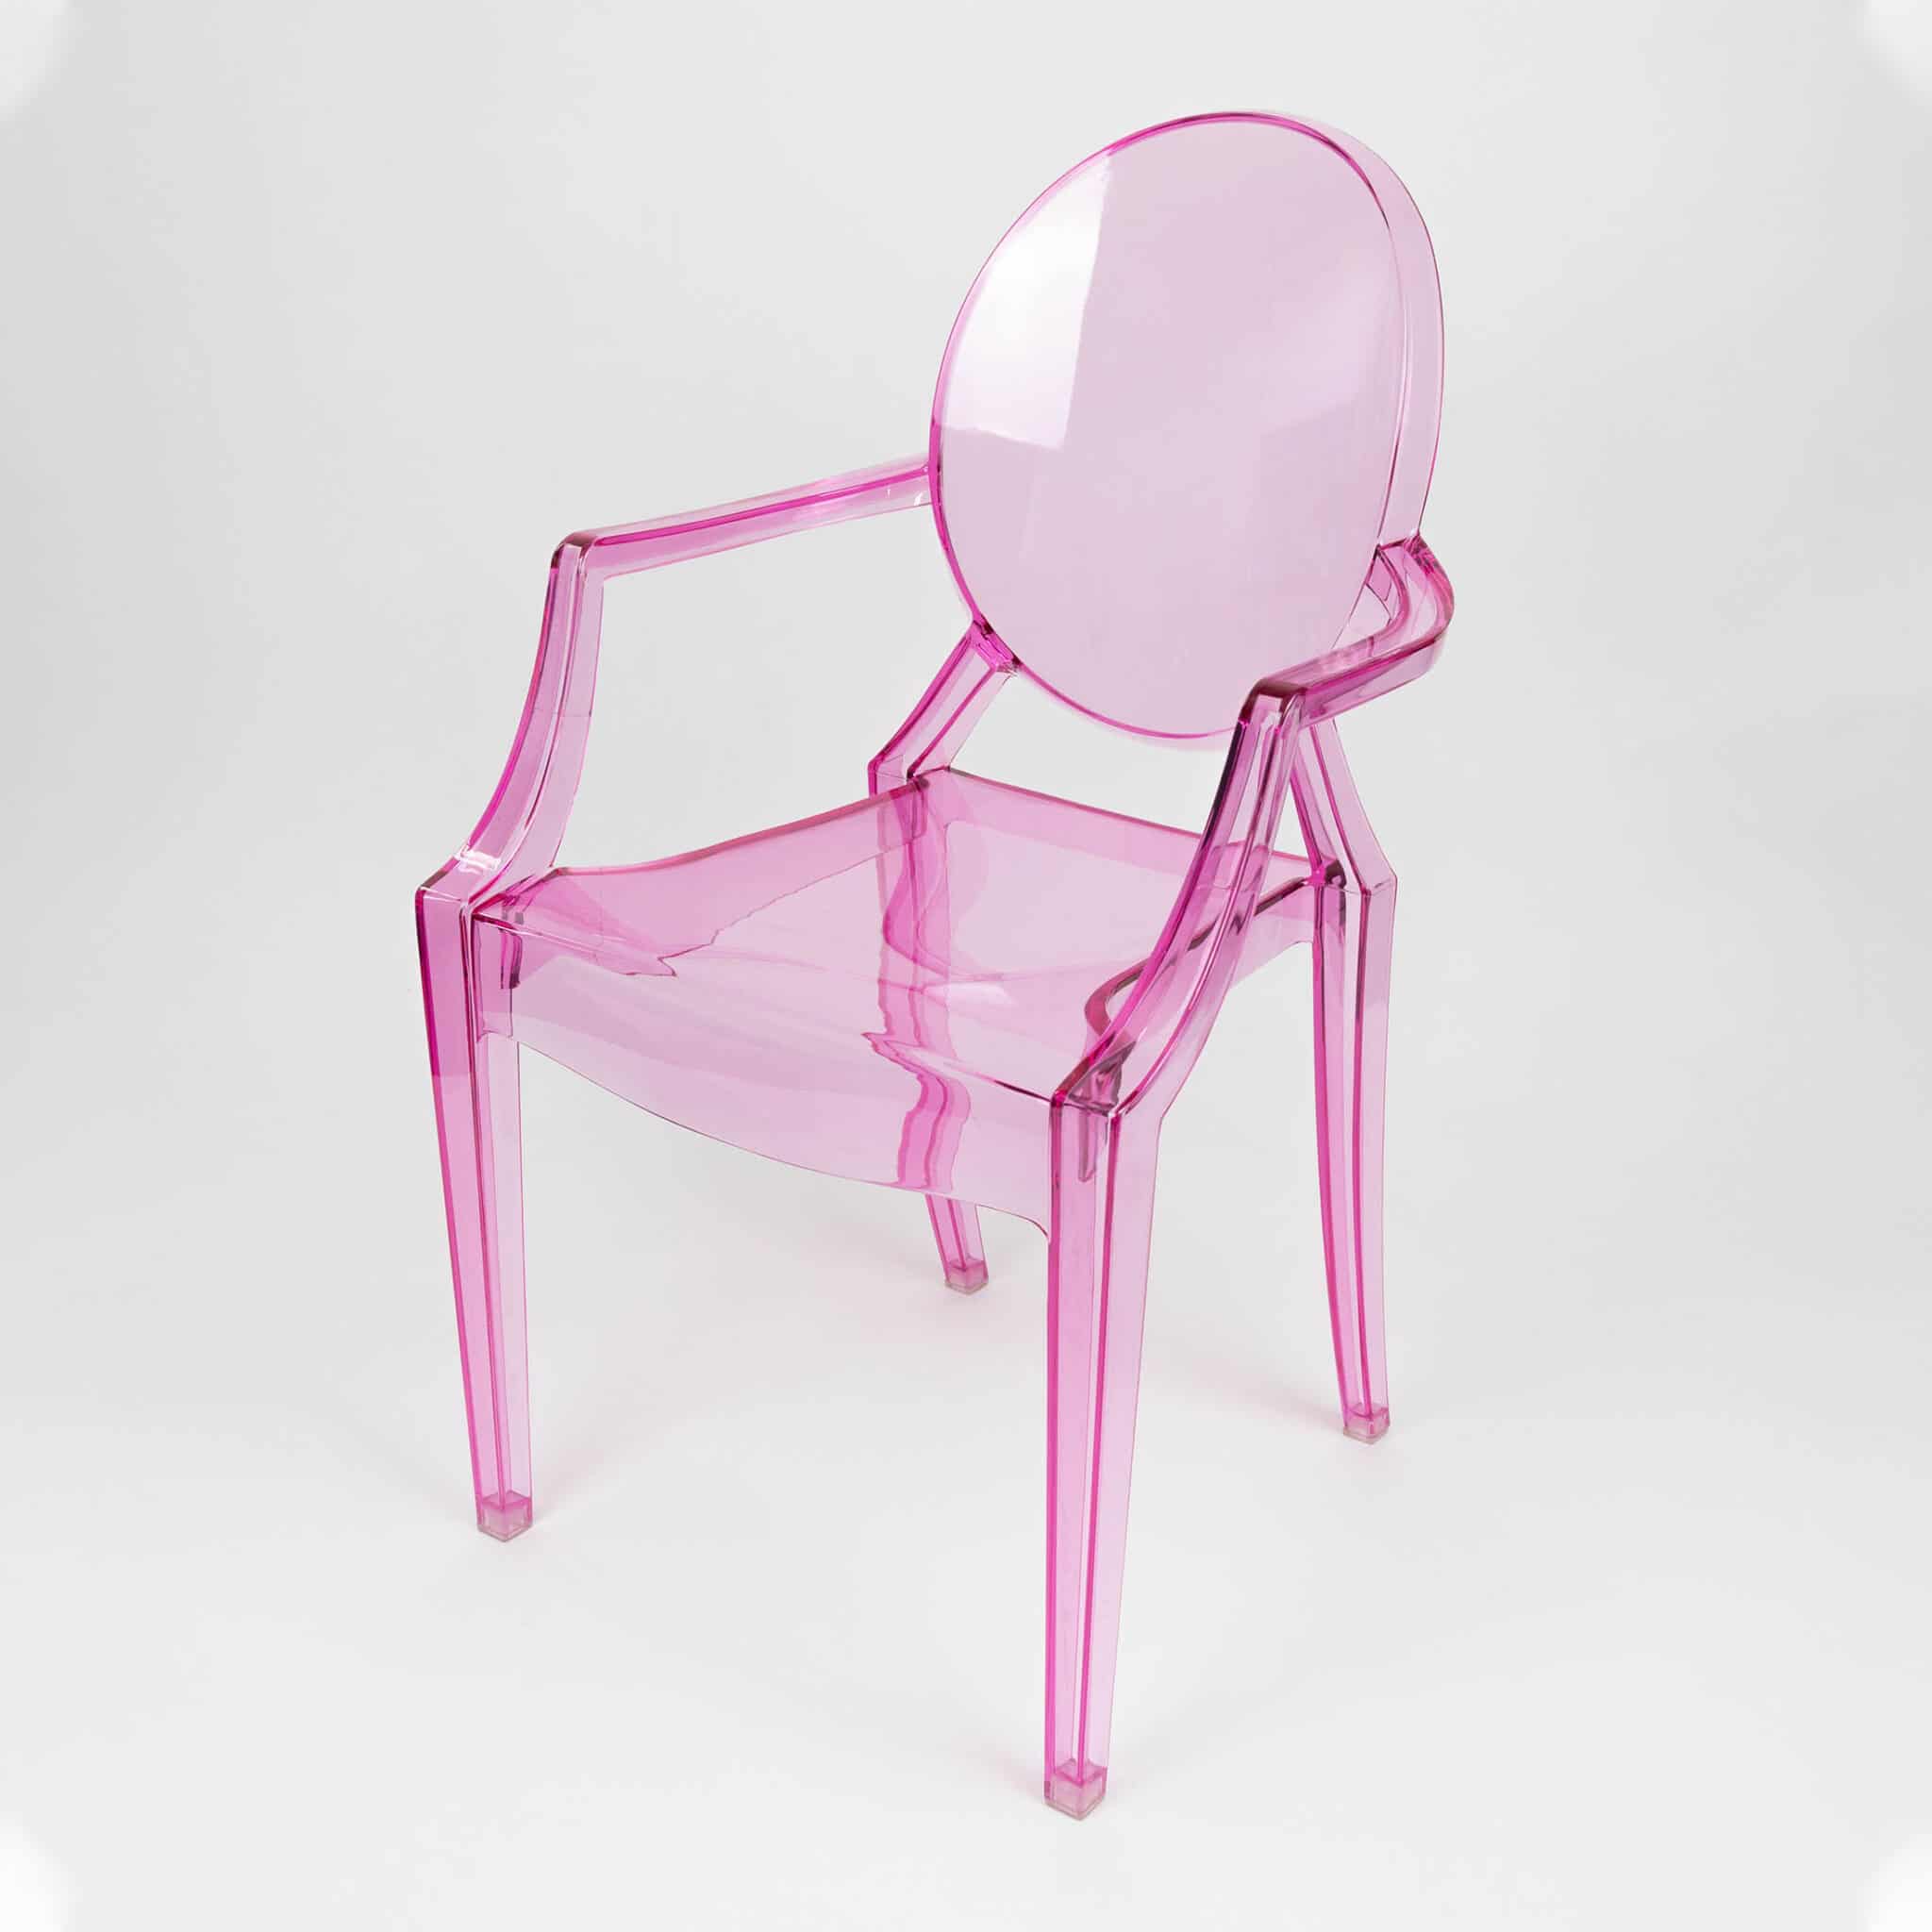 Replica Child Size Ghost Chair - Modern Take On A Traditional Design